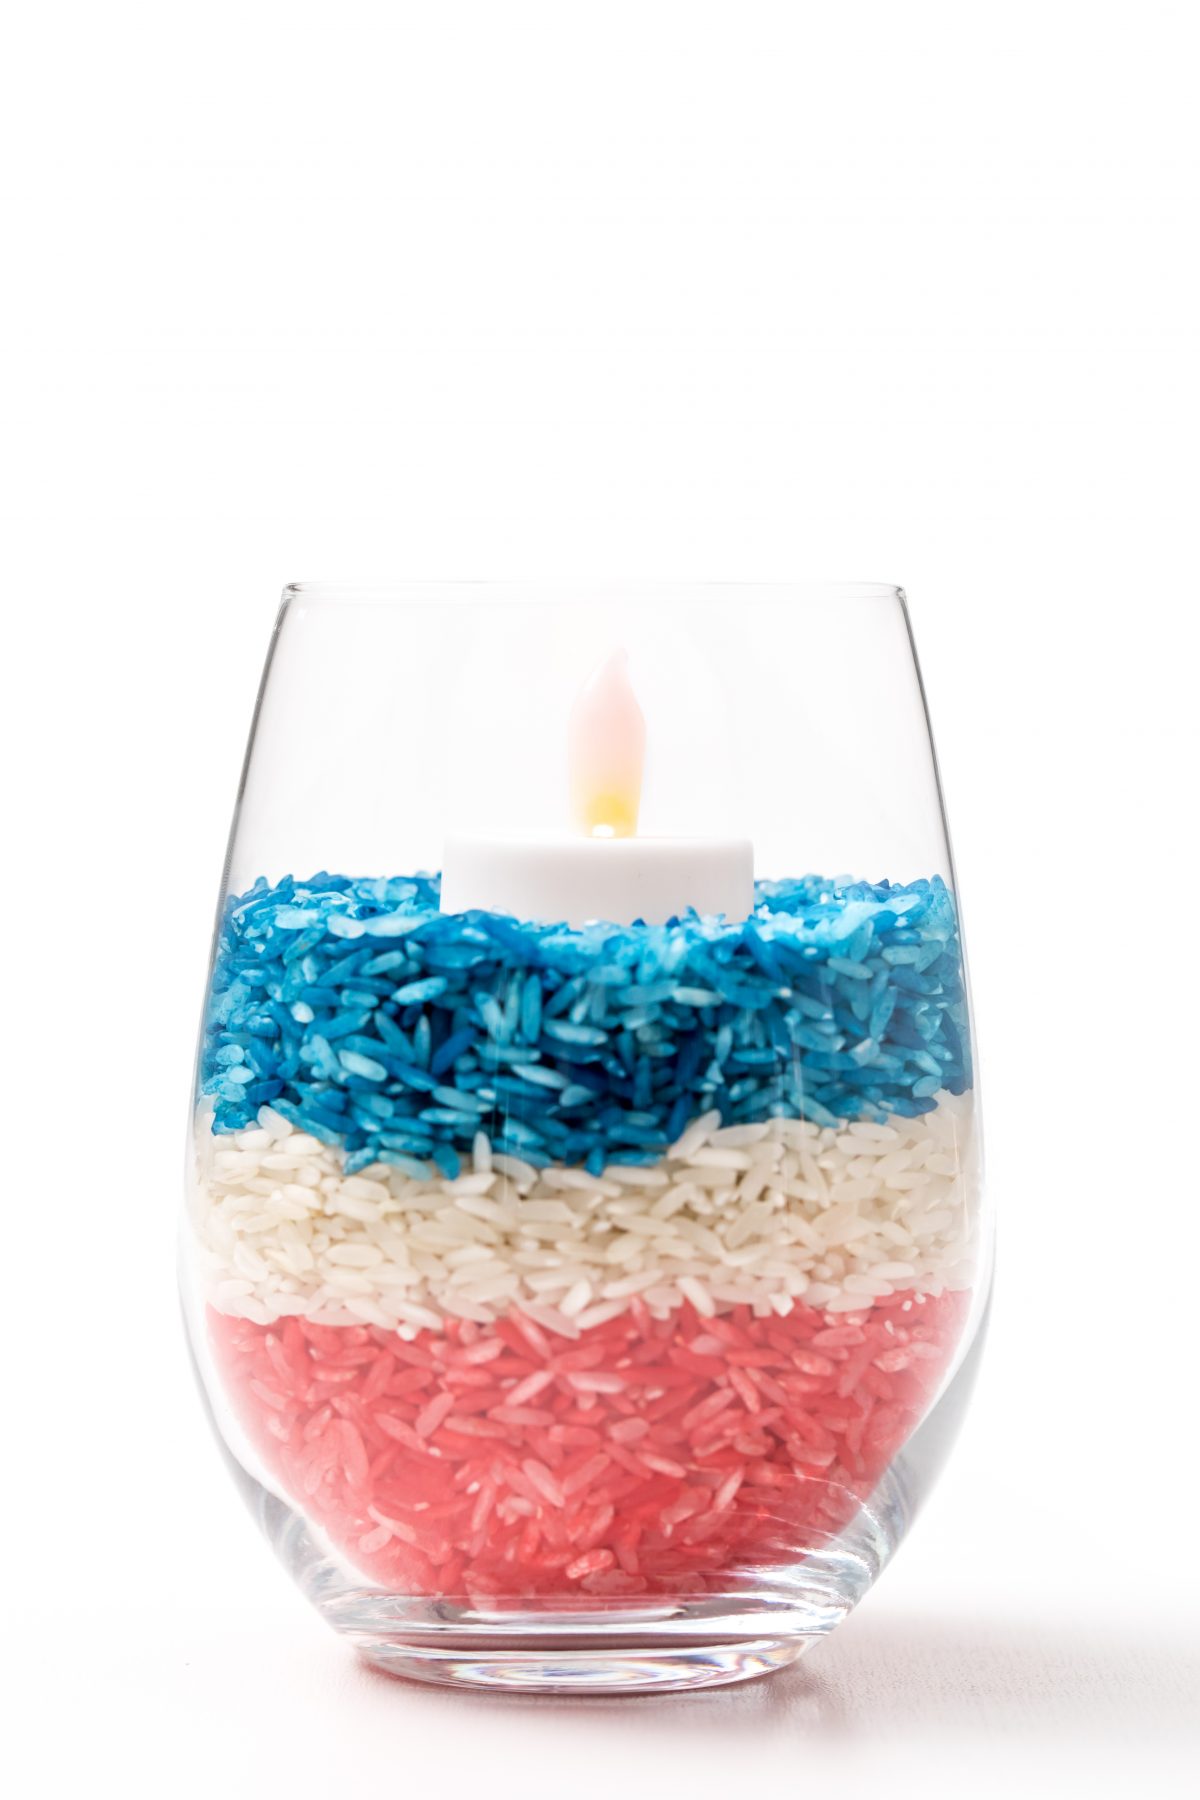 How festive is this Patriotic candleholder?